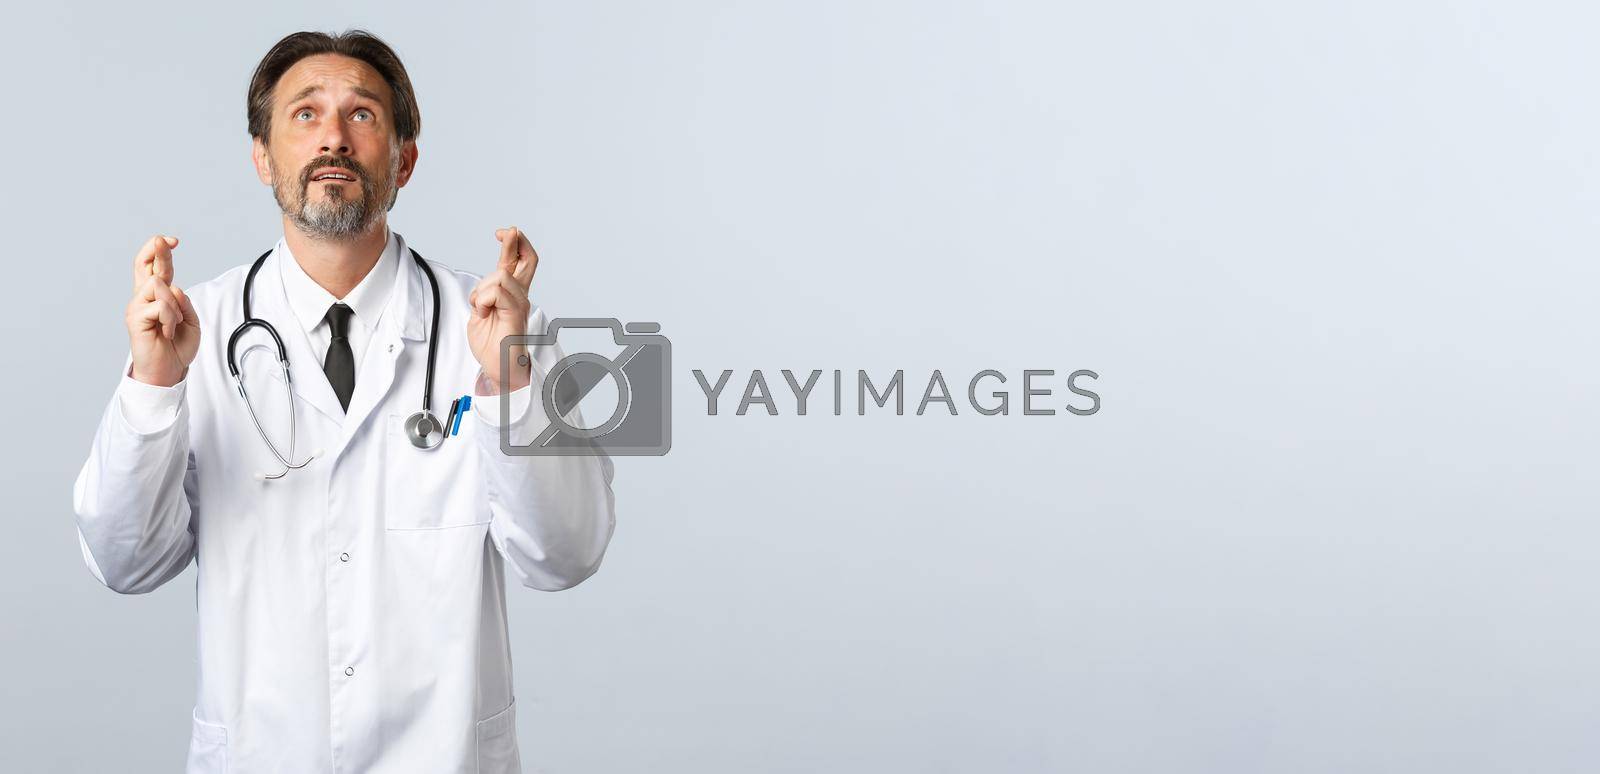 Royalty free image of Covid-19, coronavirus outbreak, healthcare workers and pandemic concept. Hopeful doctor in panic looking up sky, pleading god while cross fingers, make wish, wearing white coat by Benzoix